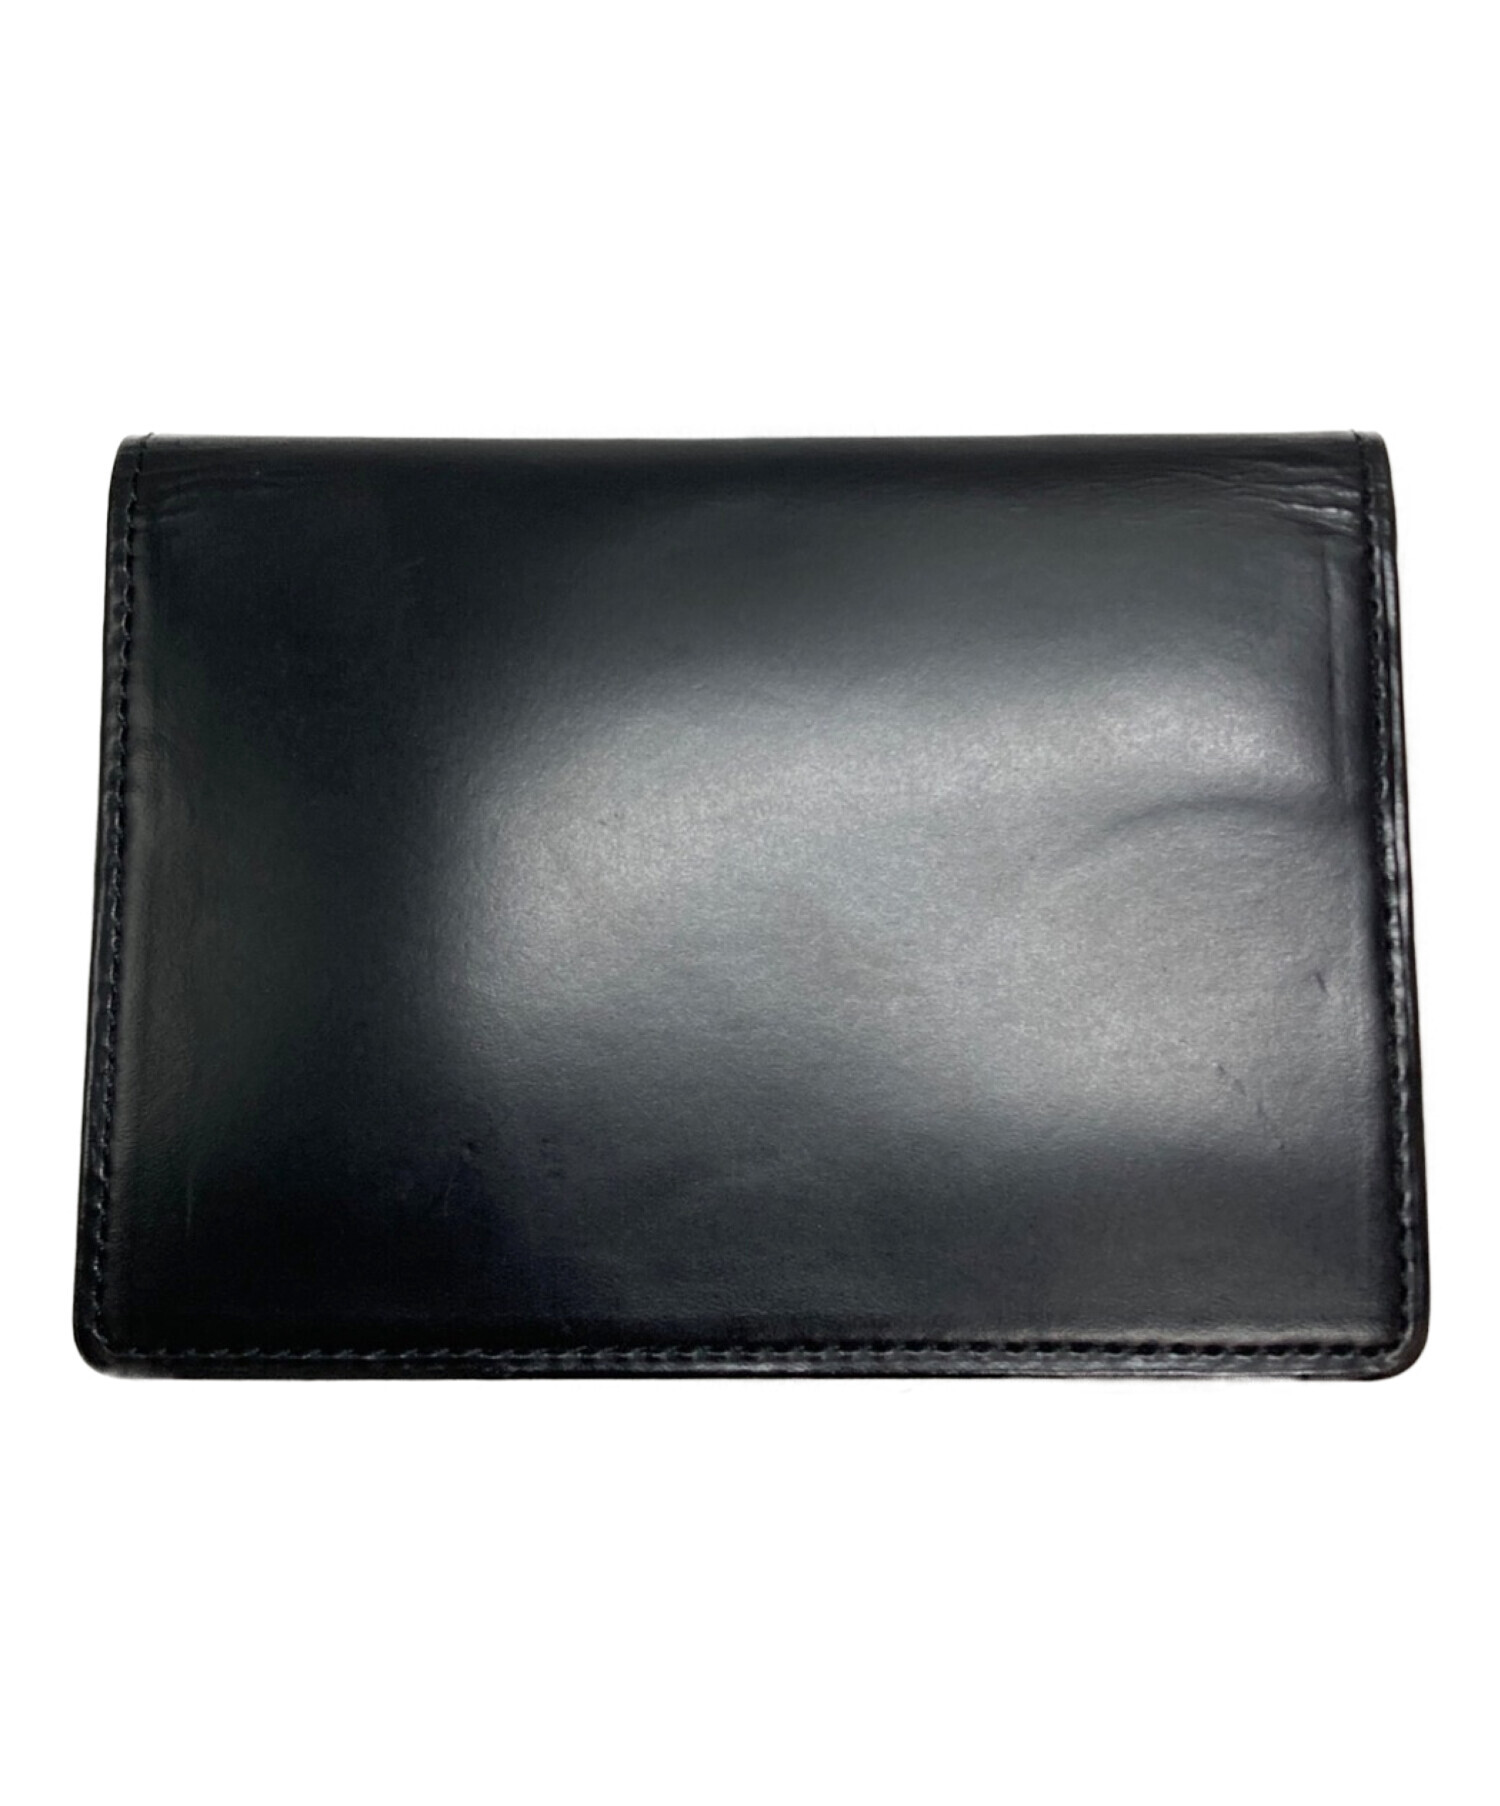 PORTER (ポーター) PS LEATHER WALLET GLASS LEATHER Ver ブラック